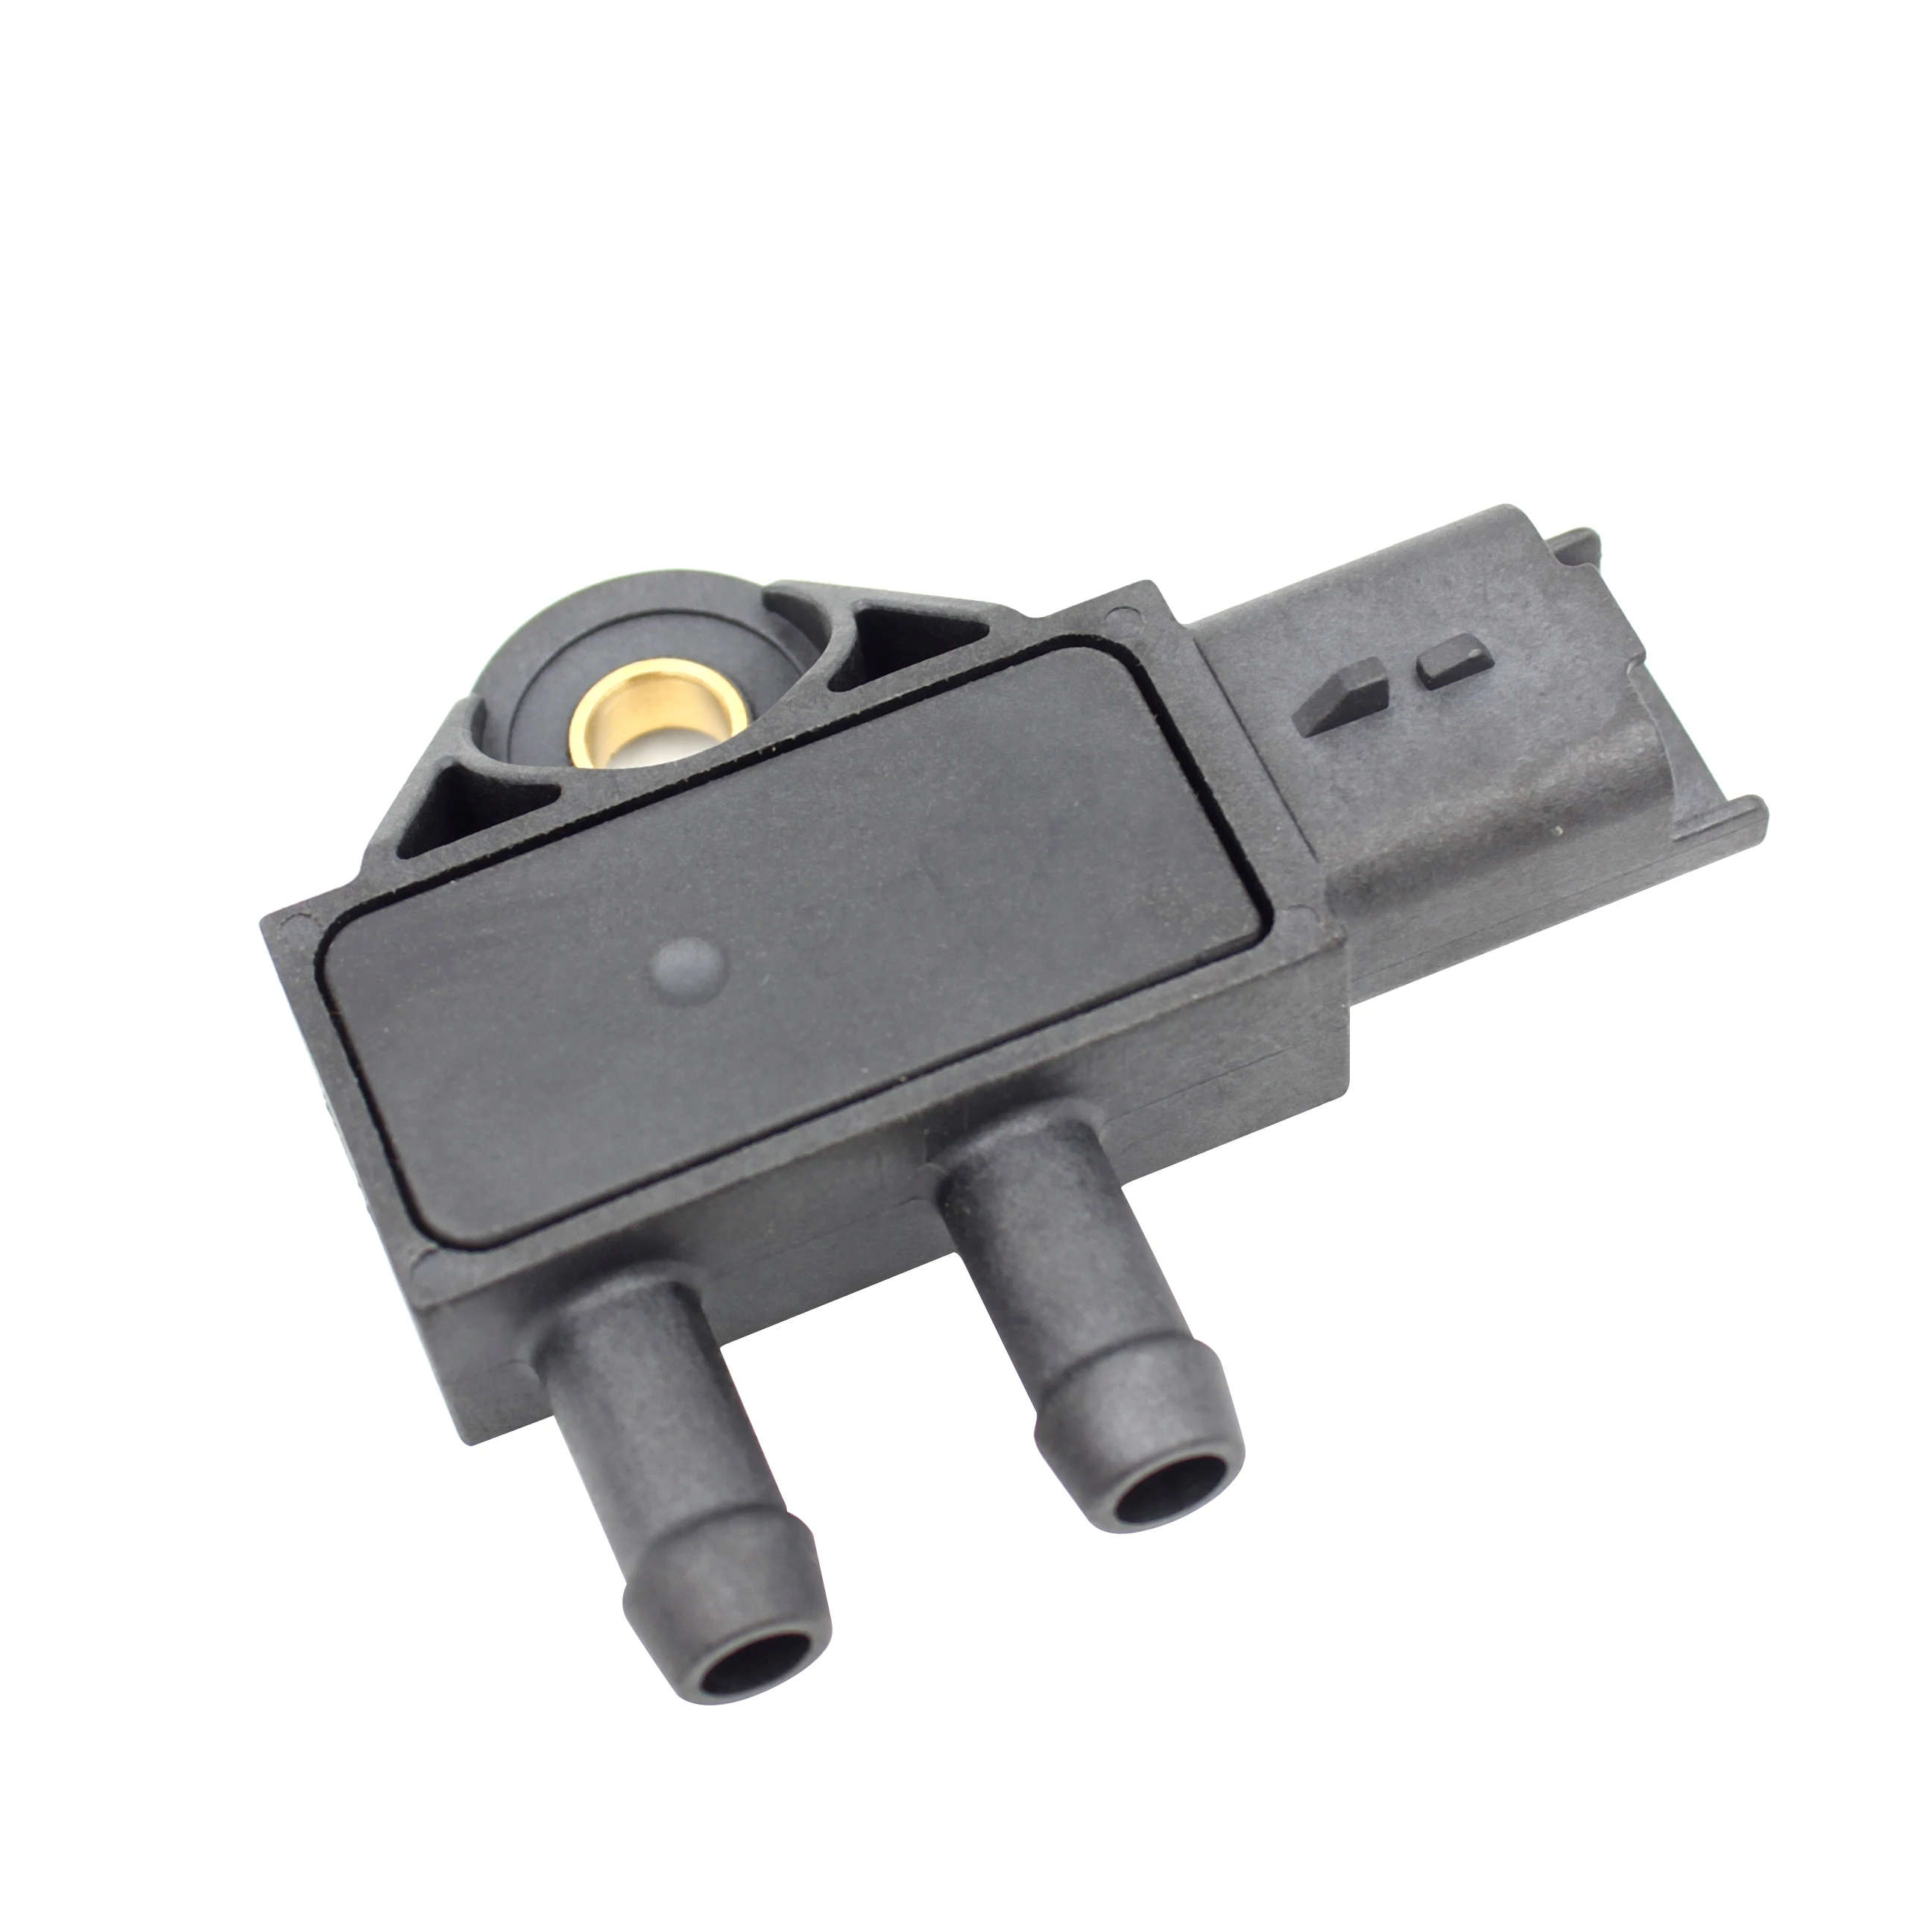 DPF Differential Exhaust Pressure Sensor For Peugeot 3008 I 0U HU 1.6 16V MPV Diesel 2009 - 2016 9662143180 21DPS100 industrial low 5 kpa 4 20ma differential pressure sensor for air hvac system wind gas differential pressure transmitter